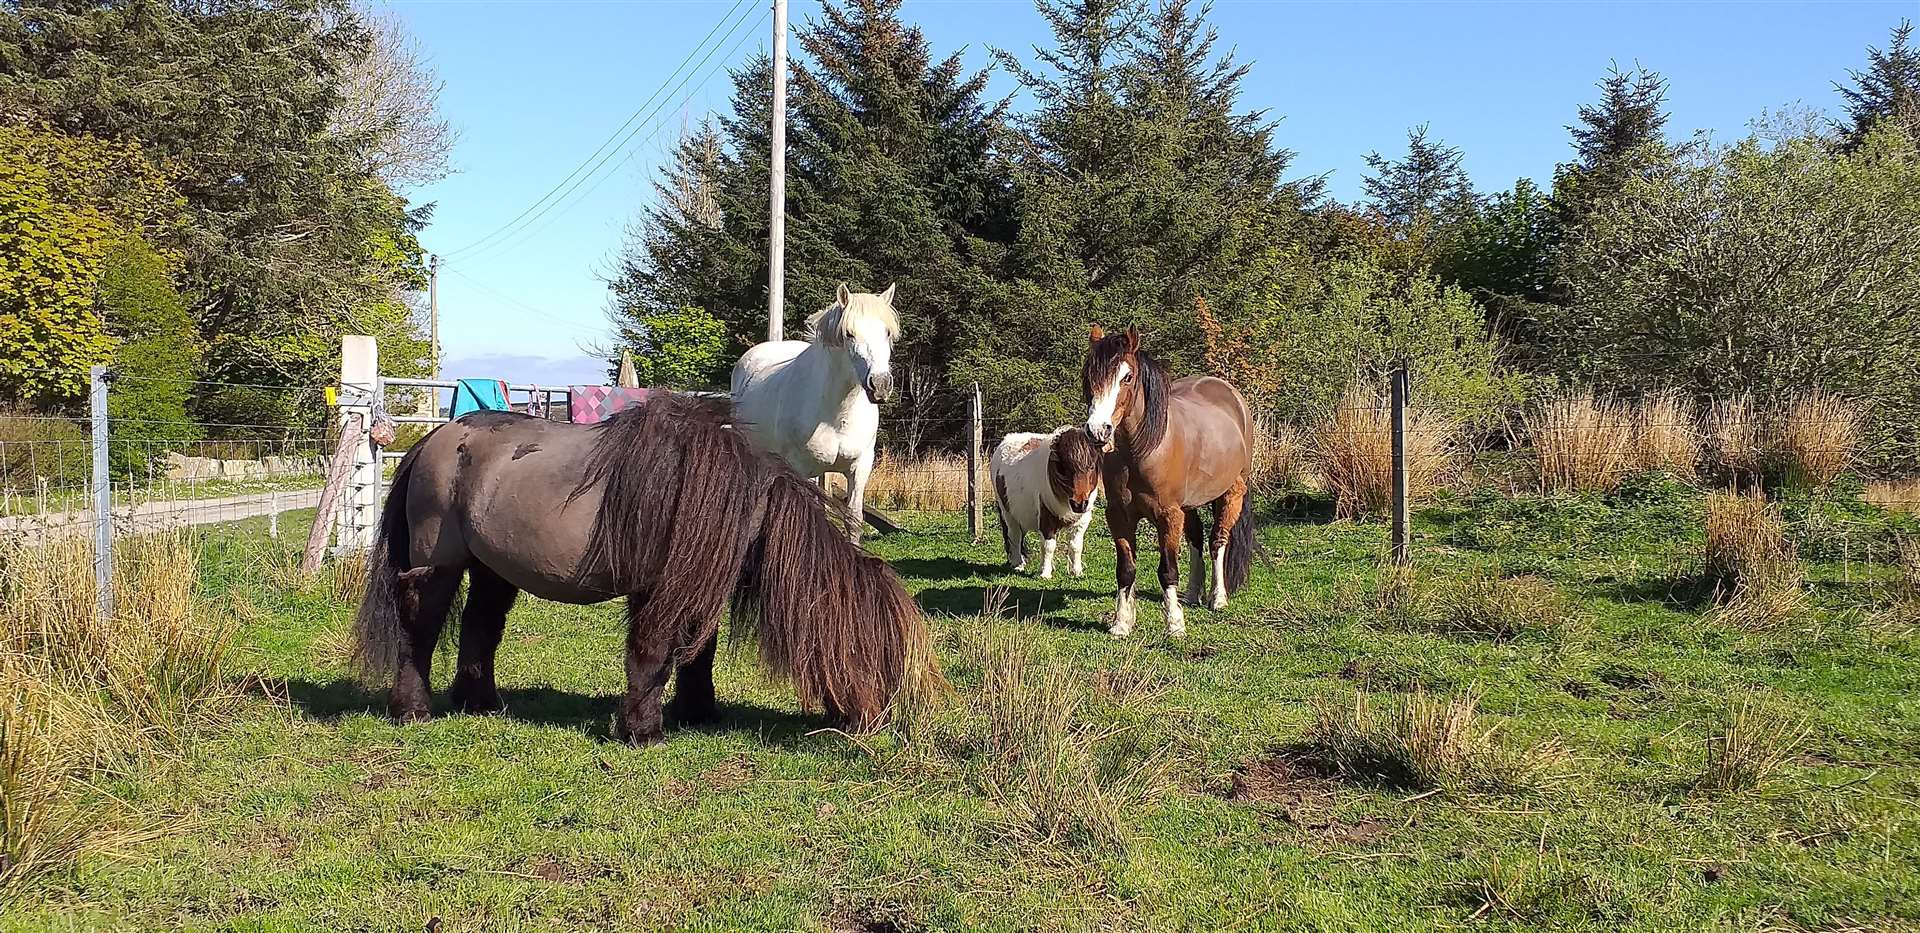 The ponies at Knockglass Farm appeared to be not affected by the incident.